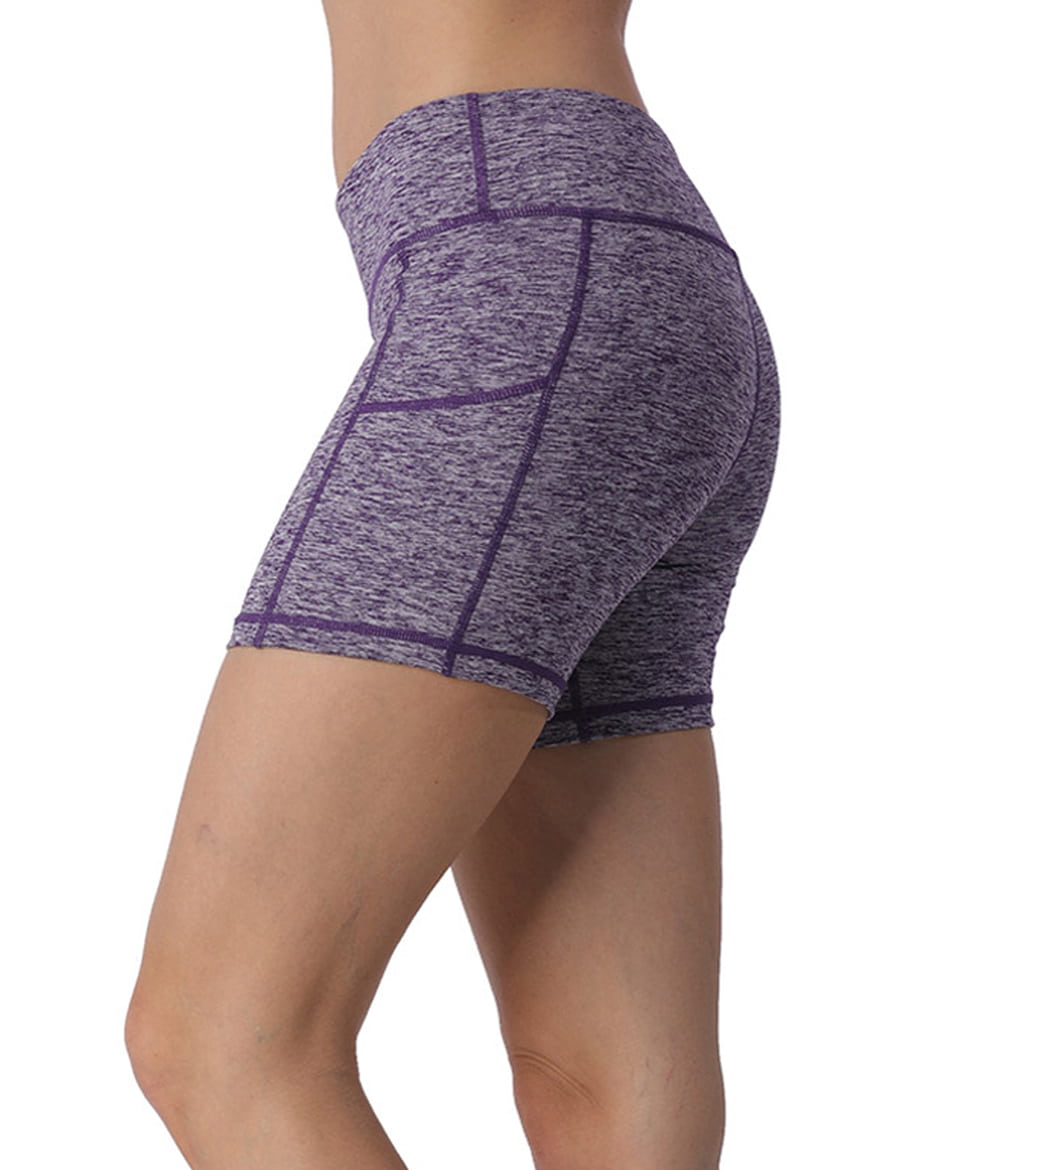 LOVESOFT Women's Workout Running Yoga Shorts with Side Pocketed